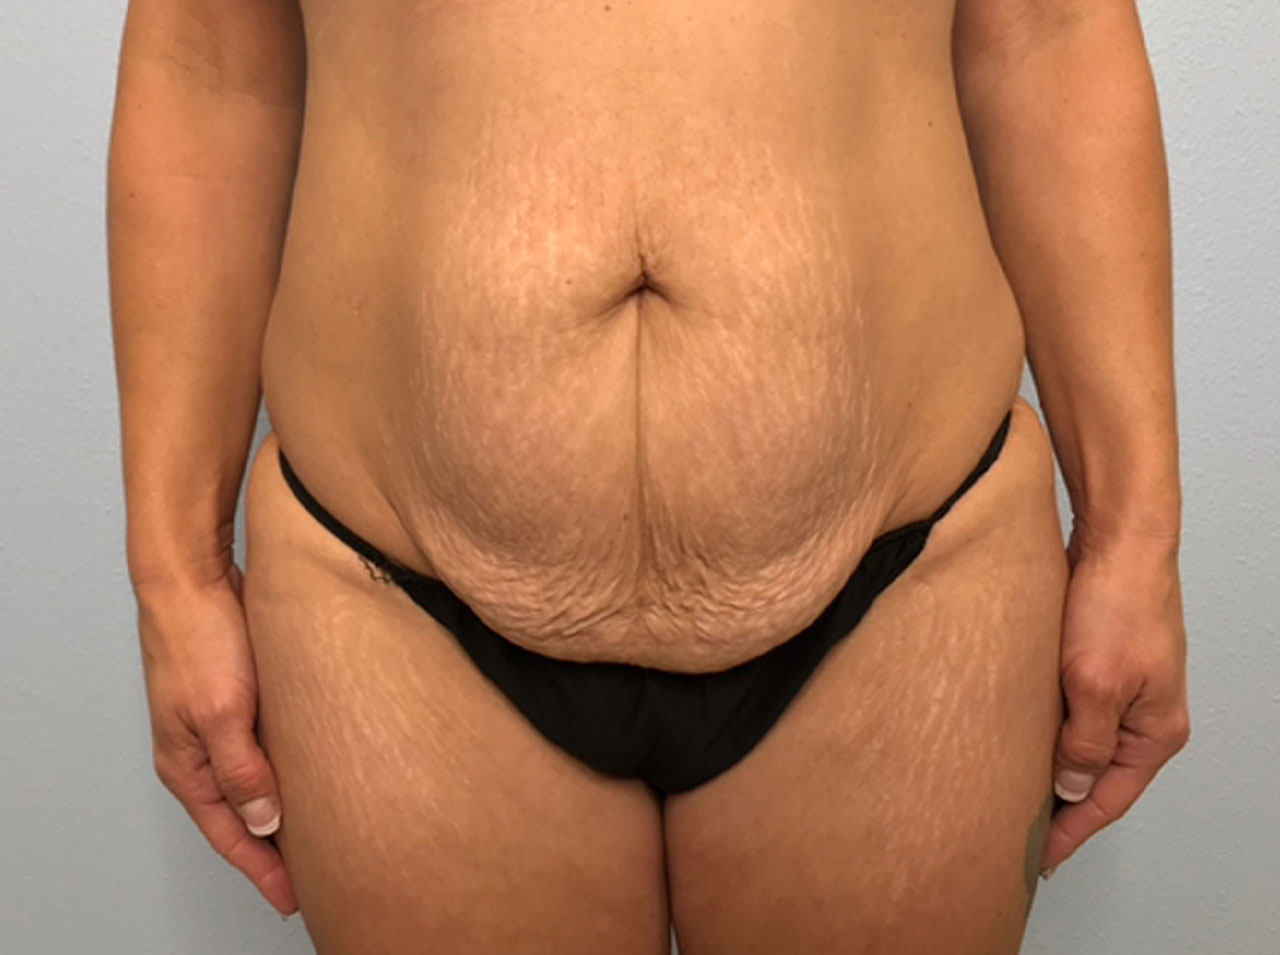 4 Tummy Tuck Before & After Photos That Prove It's Worth It - Dr. Markarian